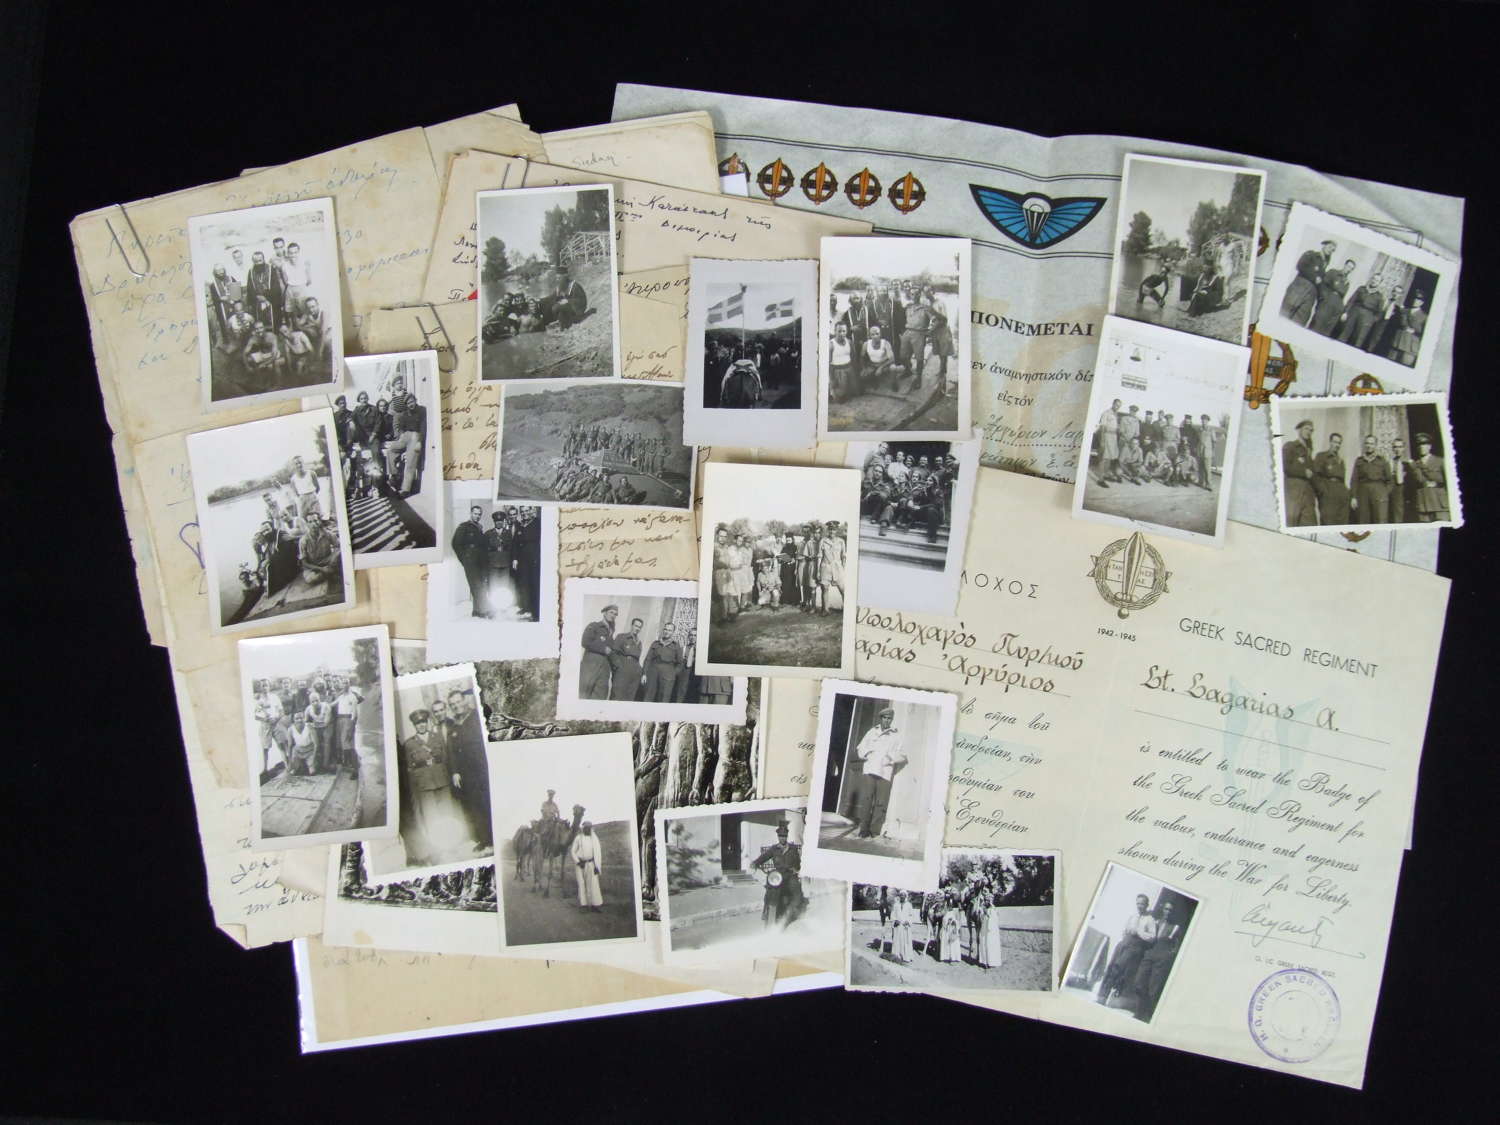 A collection of Photographs and Documents to the Greek Sacred Regiment